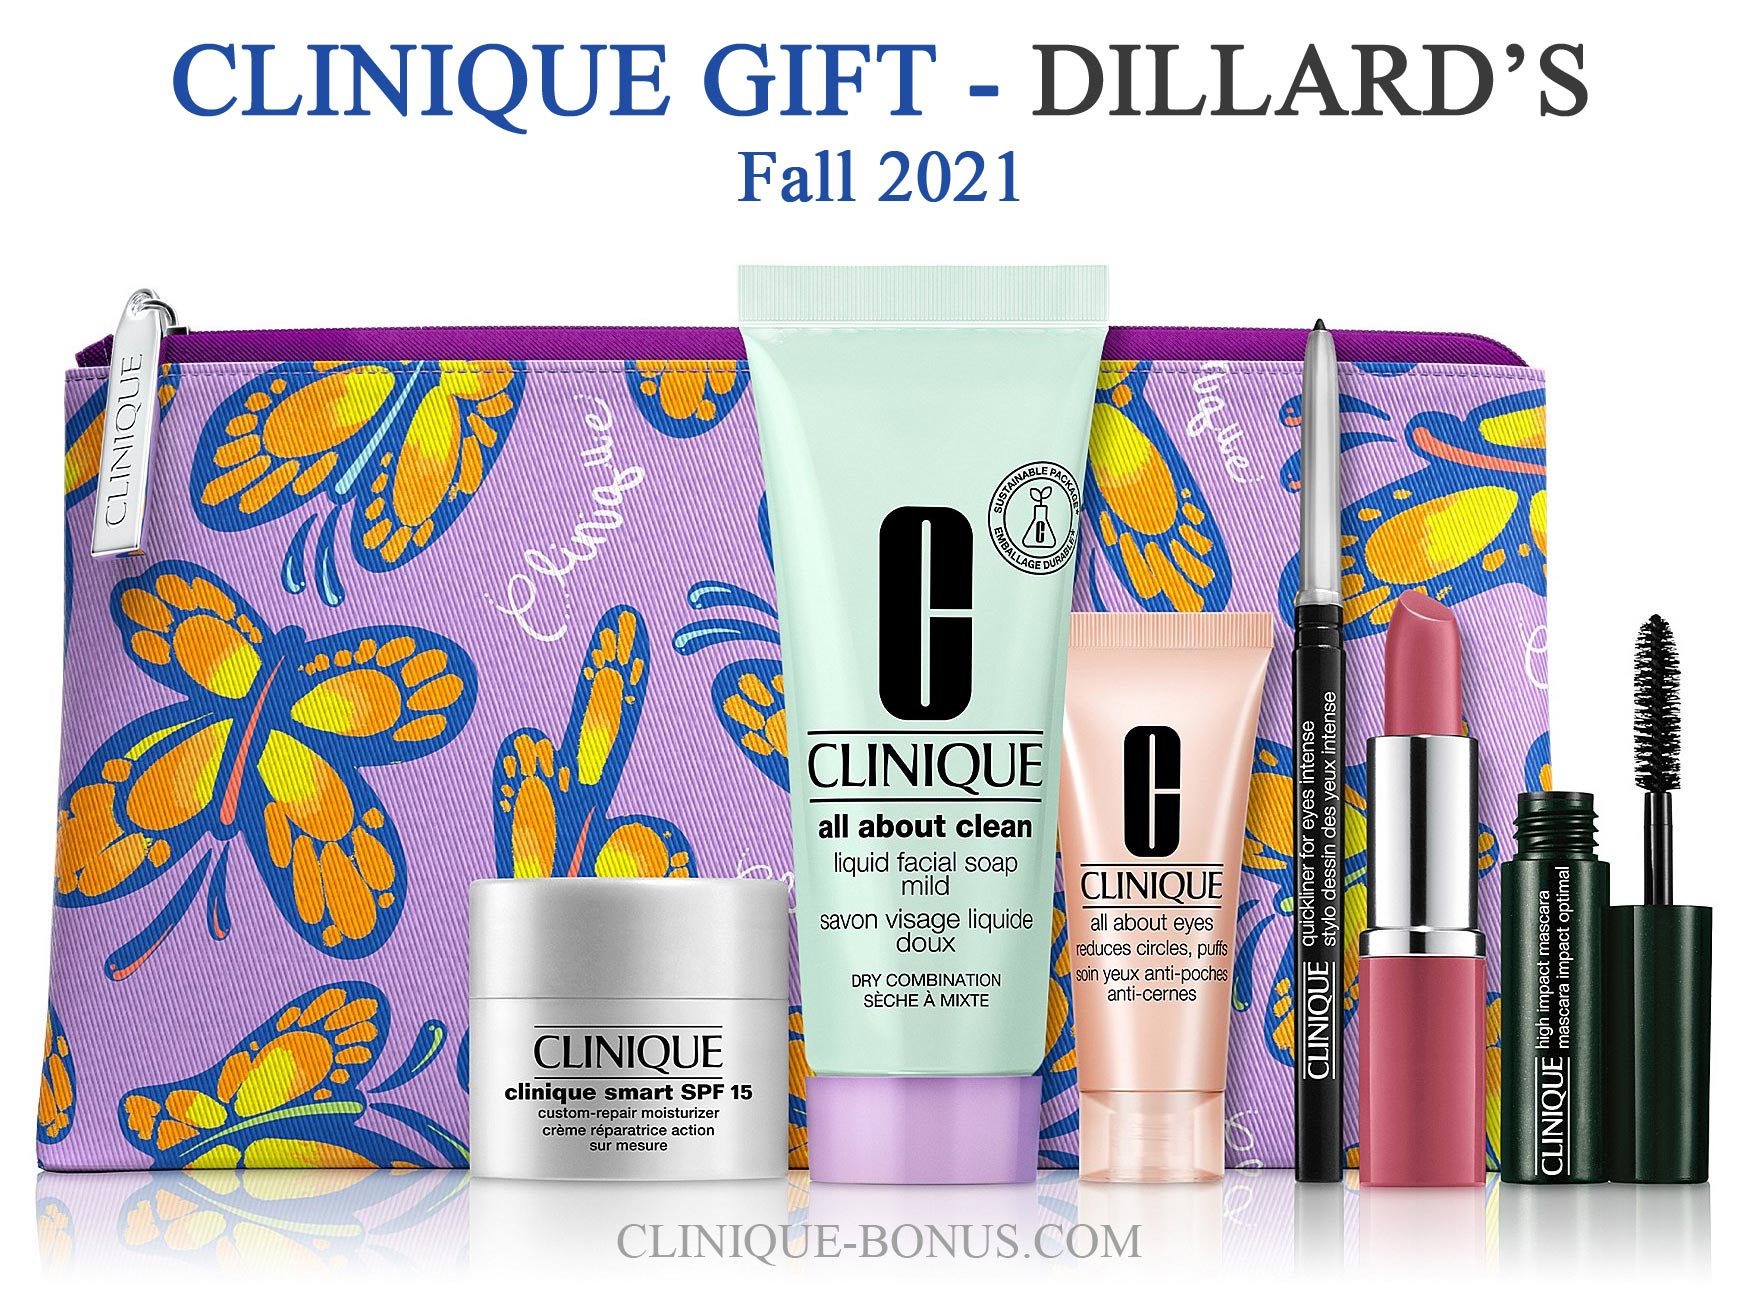 Clinique Bonus Time at Boscov's and Dillard's Spring 2019 and Violet Grey  Beauty Box